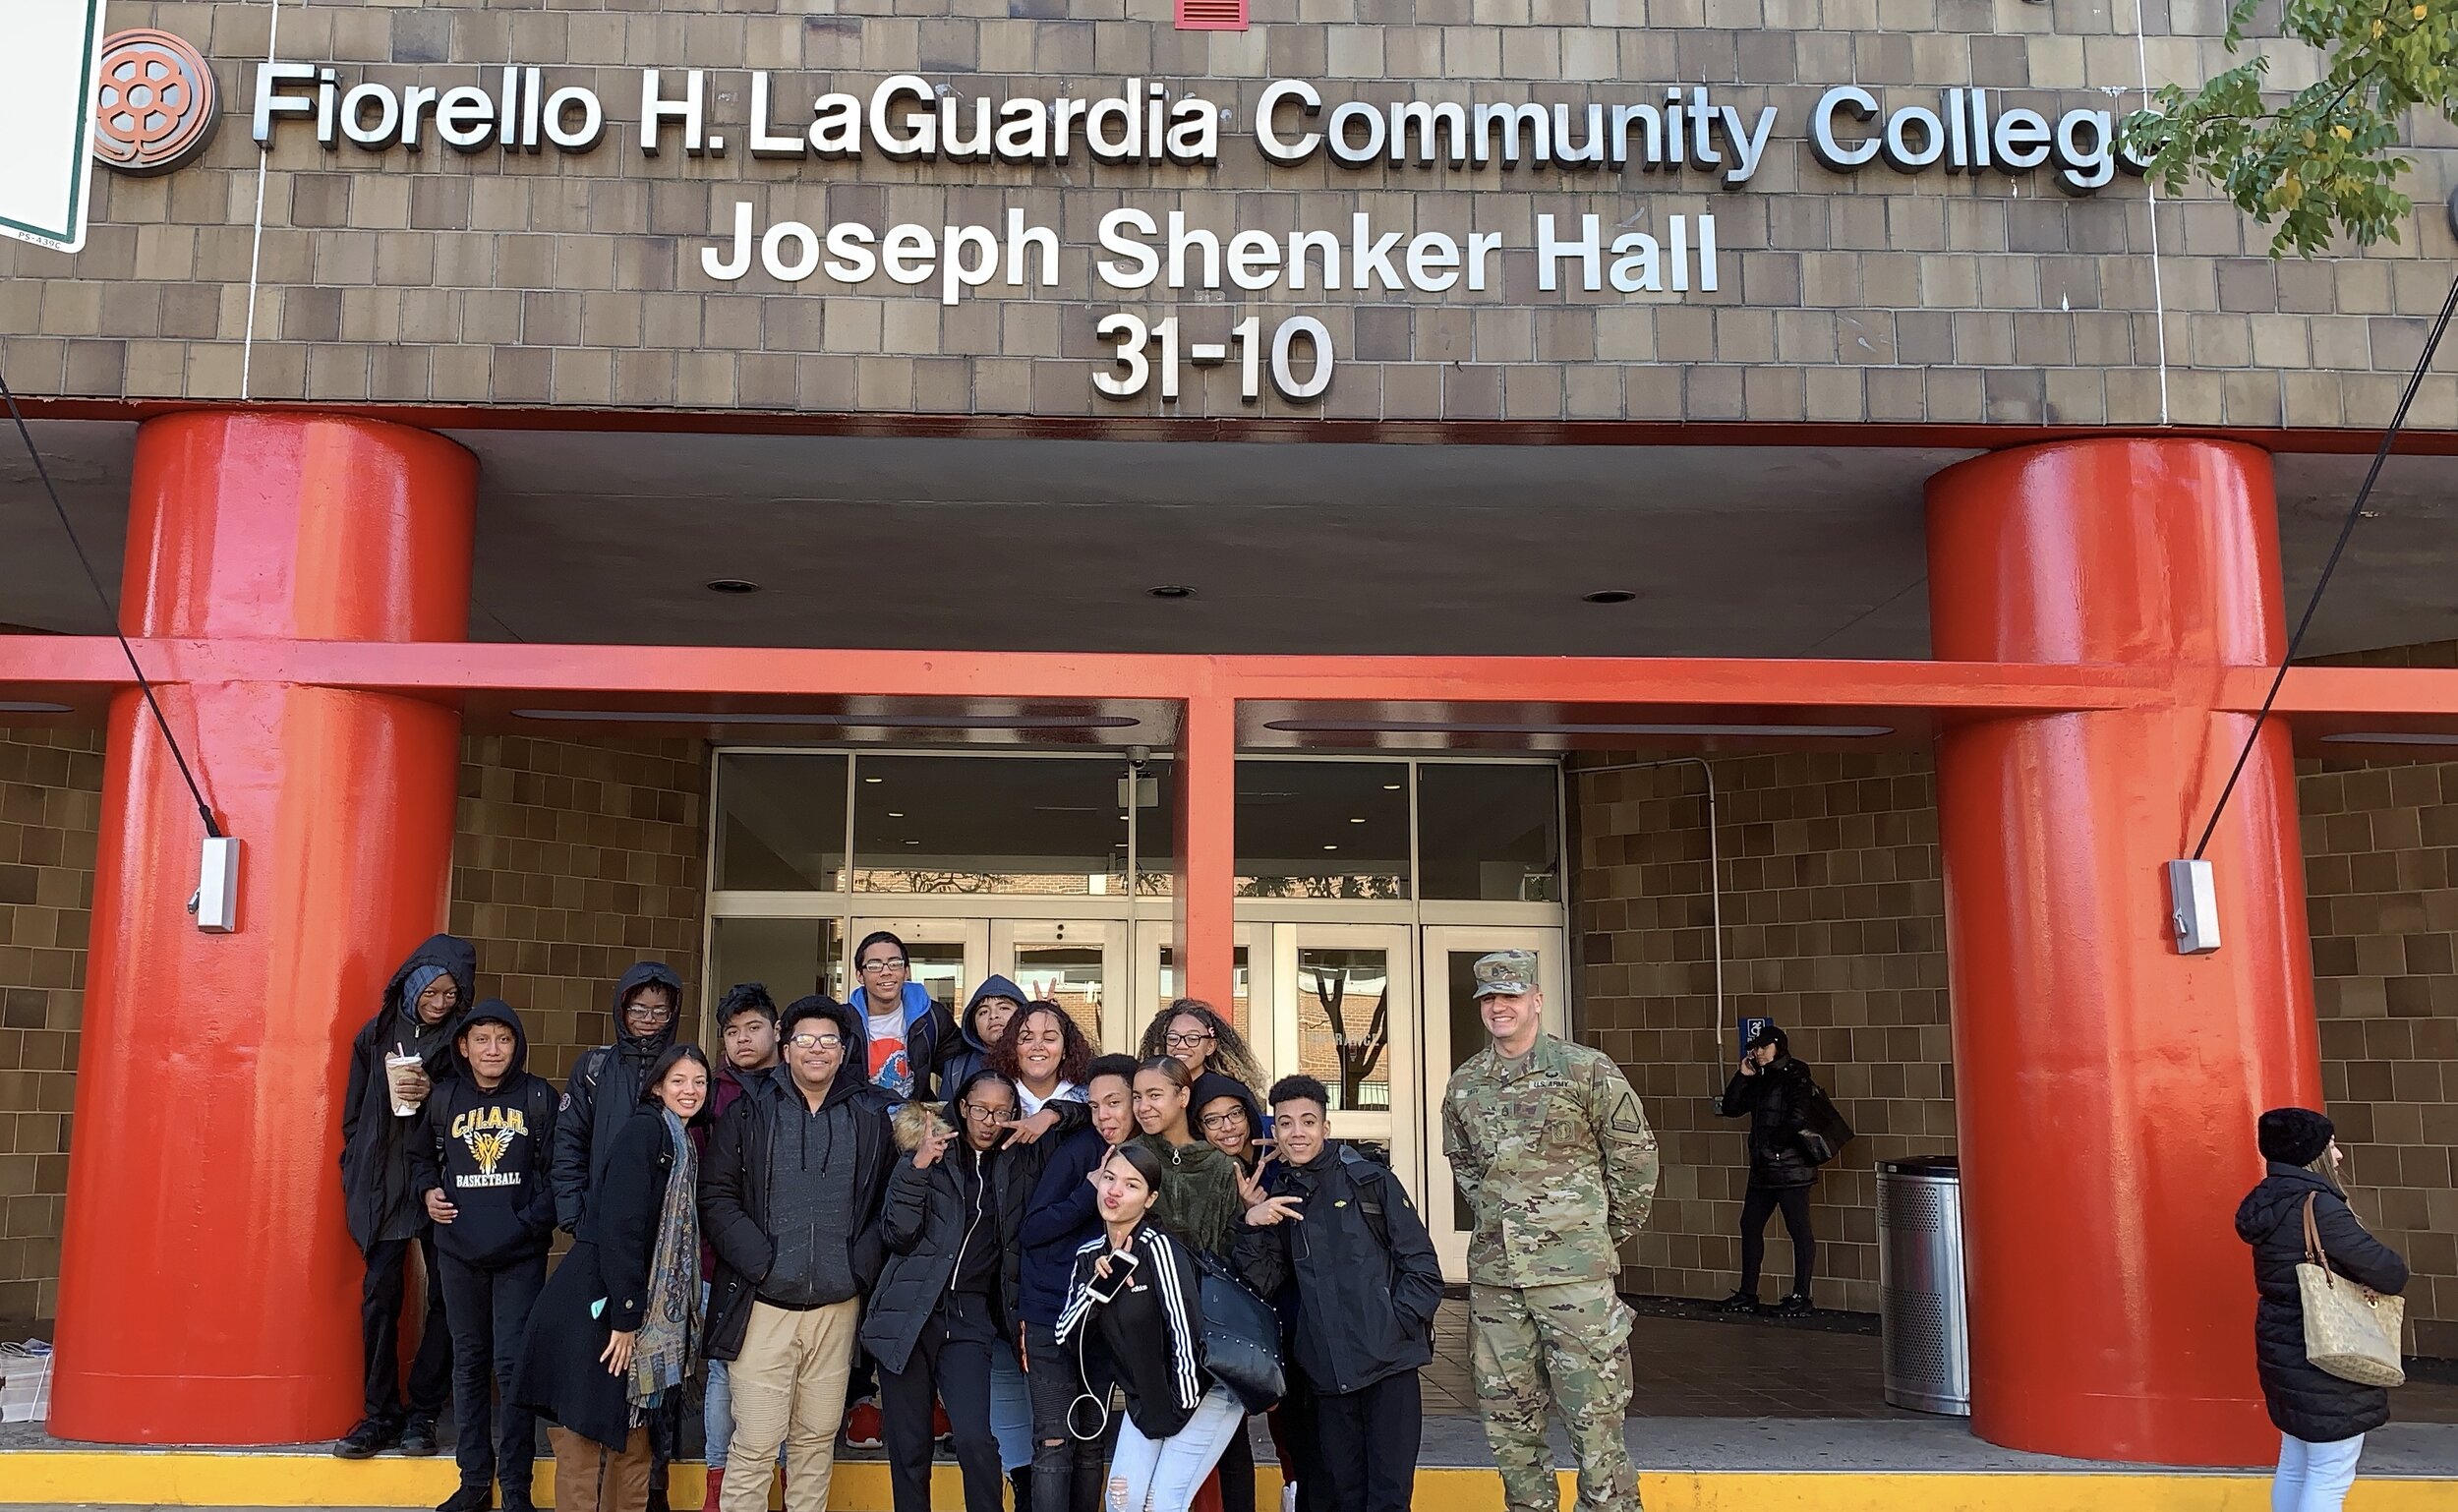 Middle Schoolers Tour Laguardia Community College The Community Health Academy Of The Heights